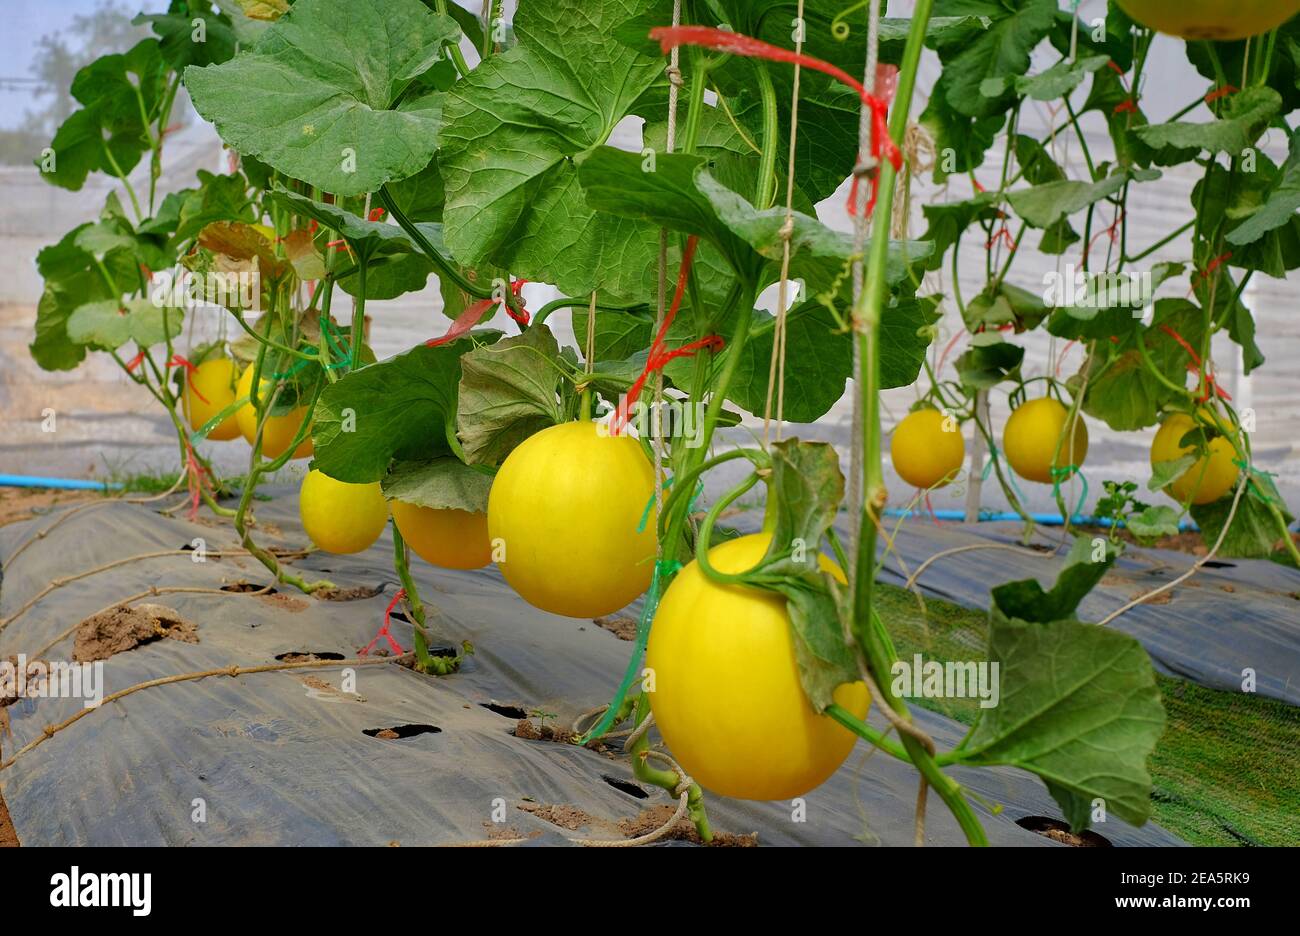 A bunch of ripe yellow melons hanging from their vines in a greenhouse, ready to be harvested. Stock Photo